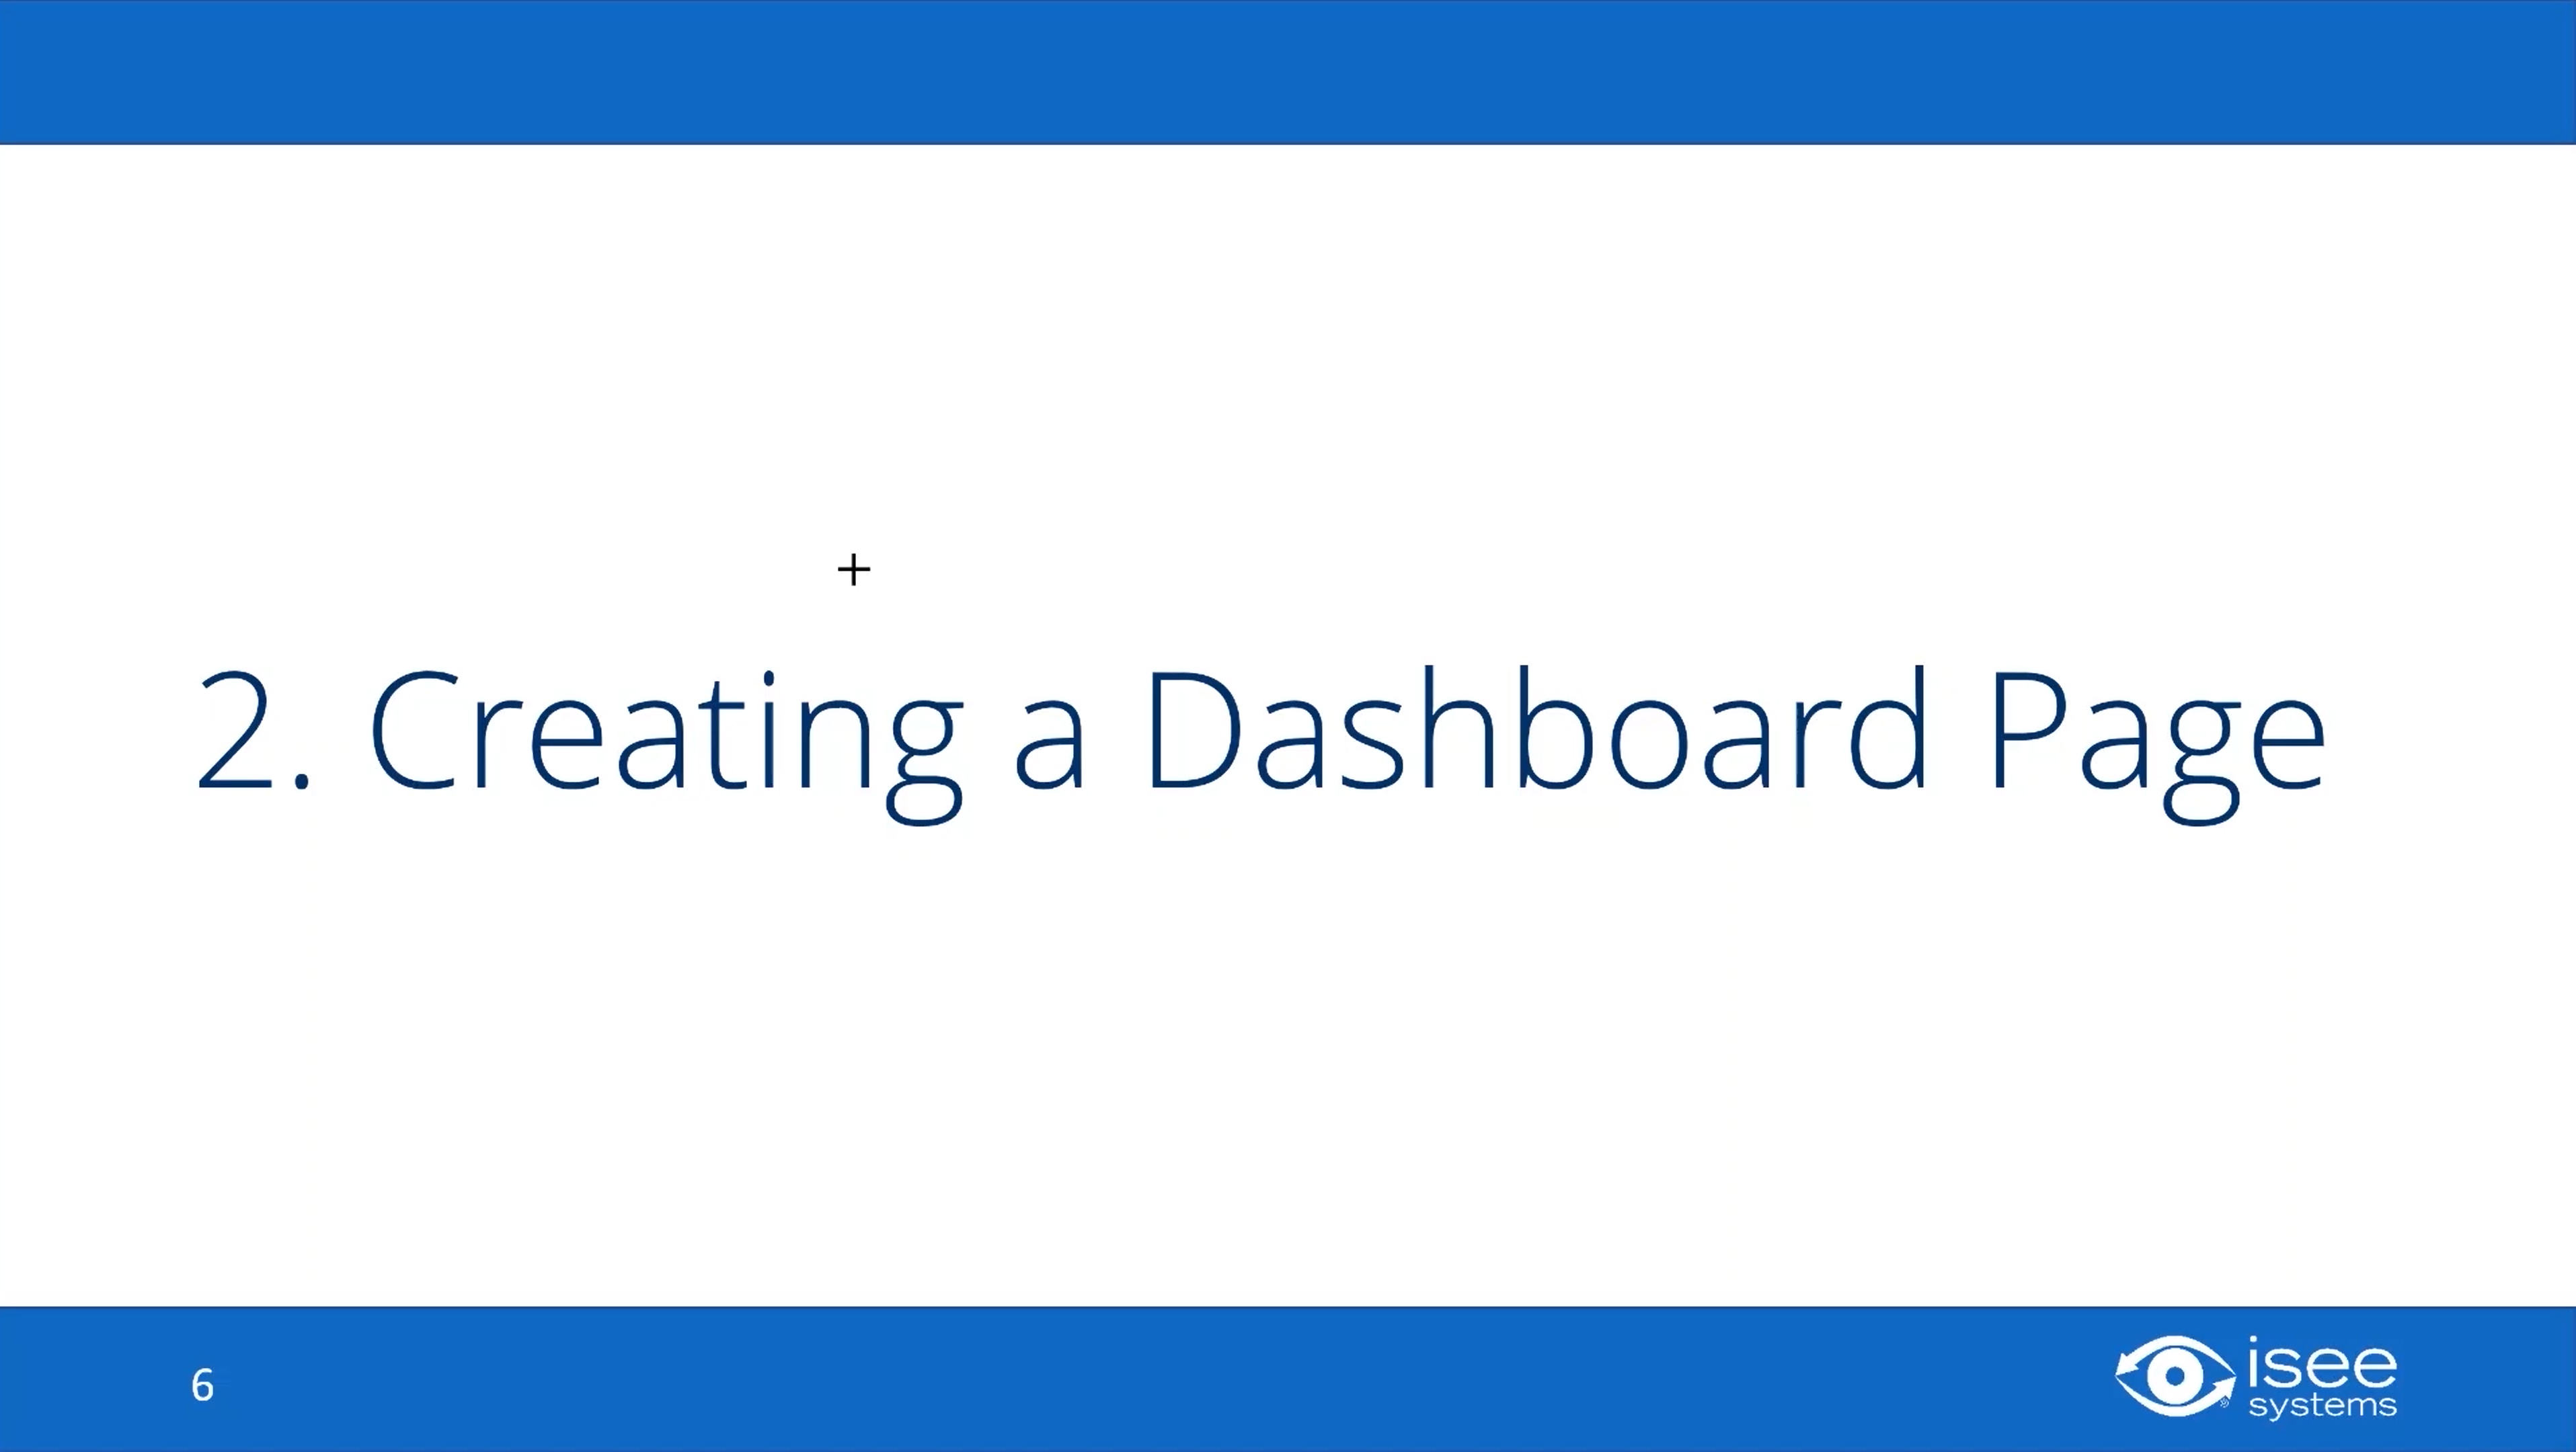 Creating a Dashboard Page